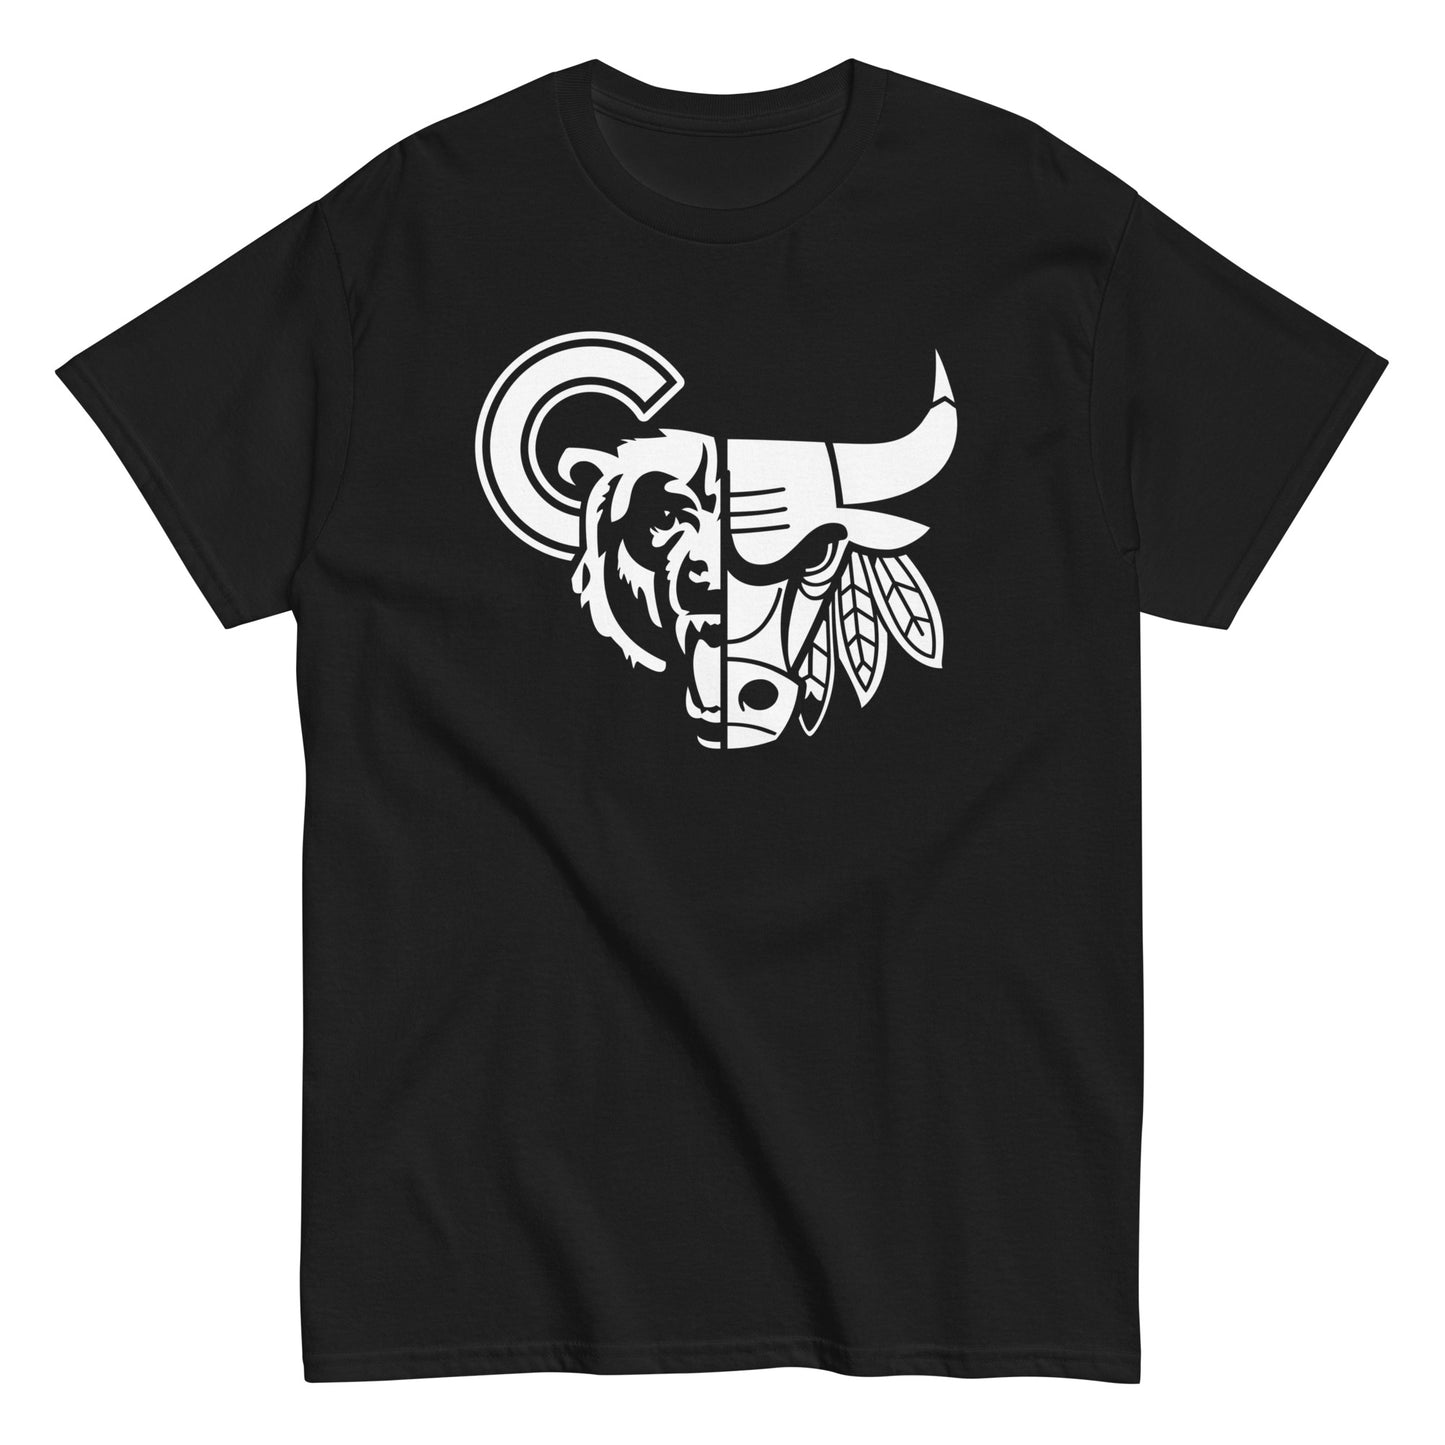 CHI (Cubs) Tee - 1 Color